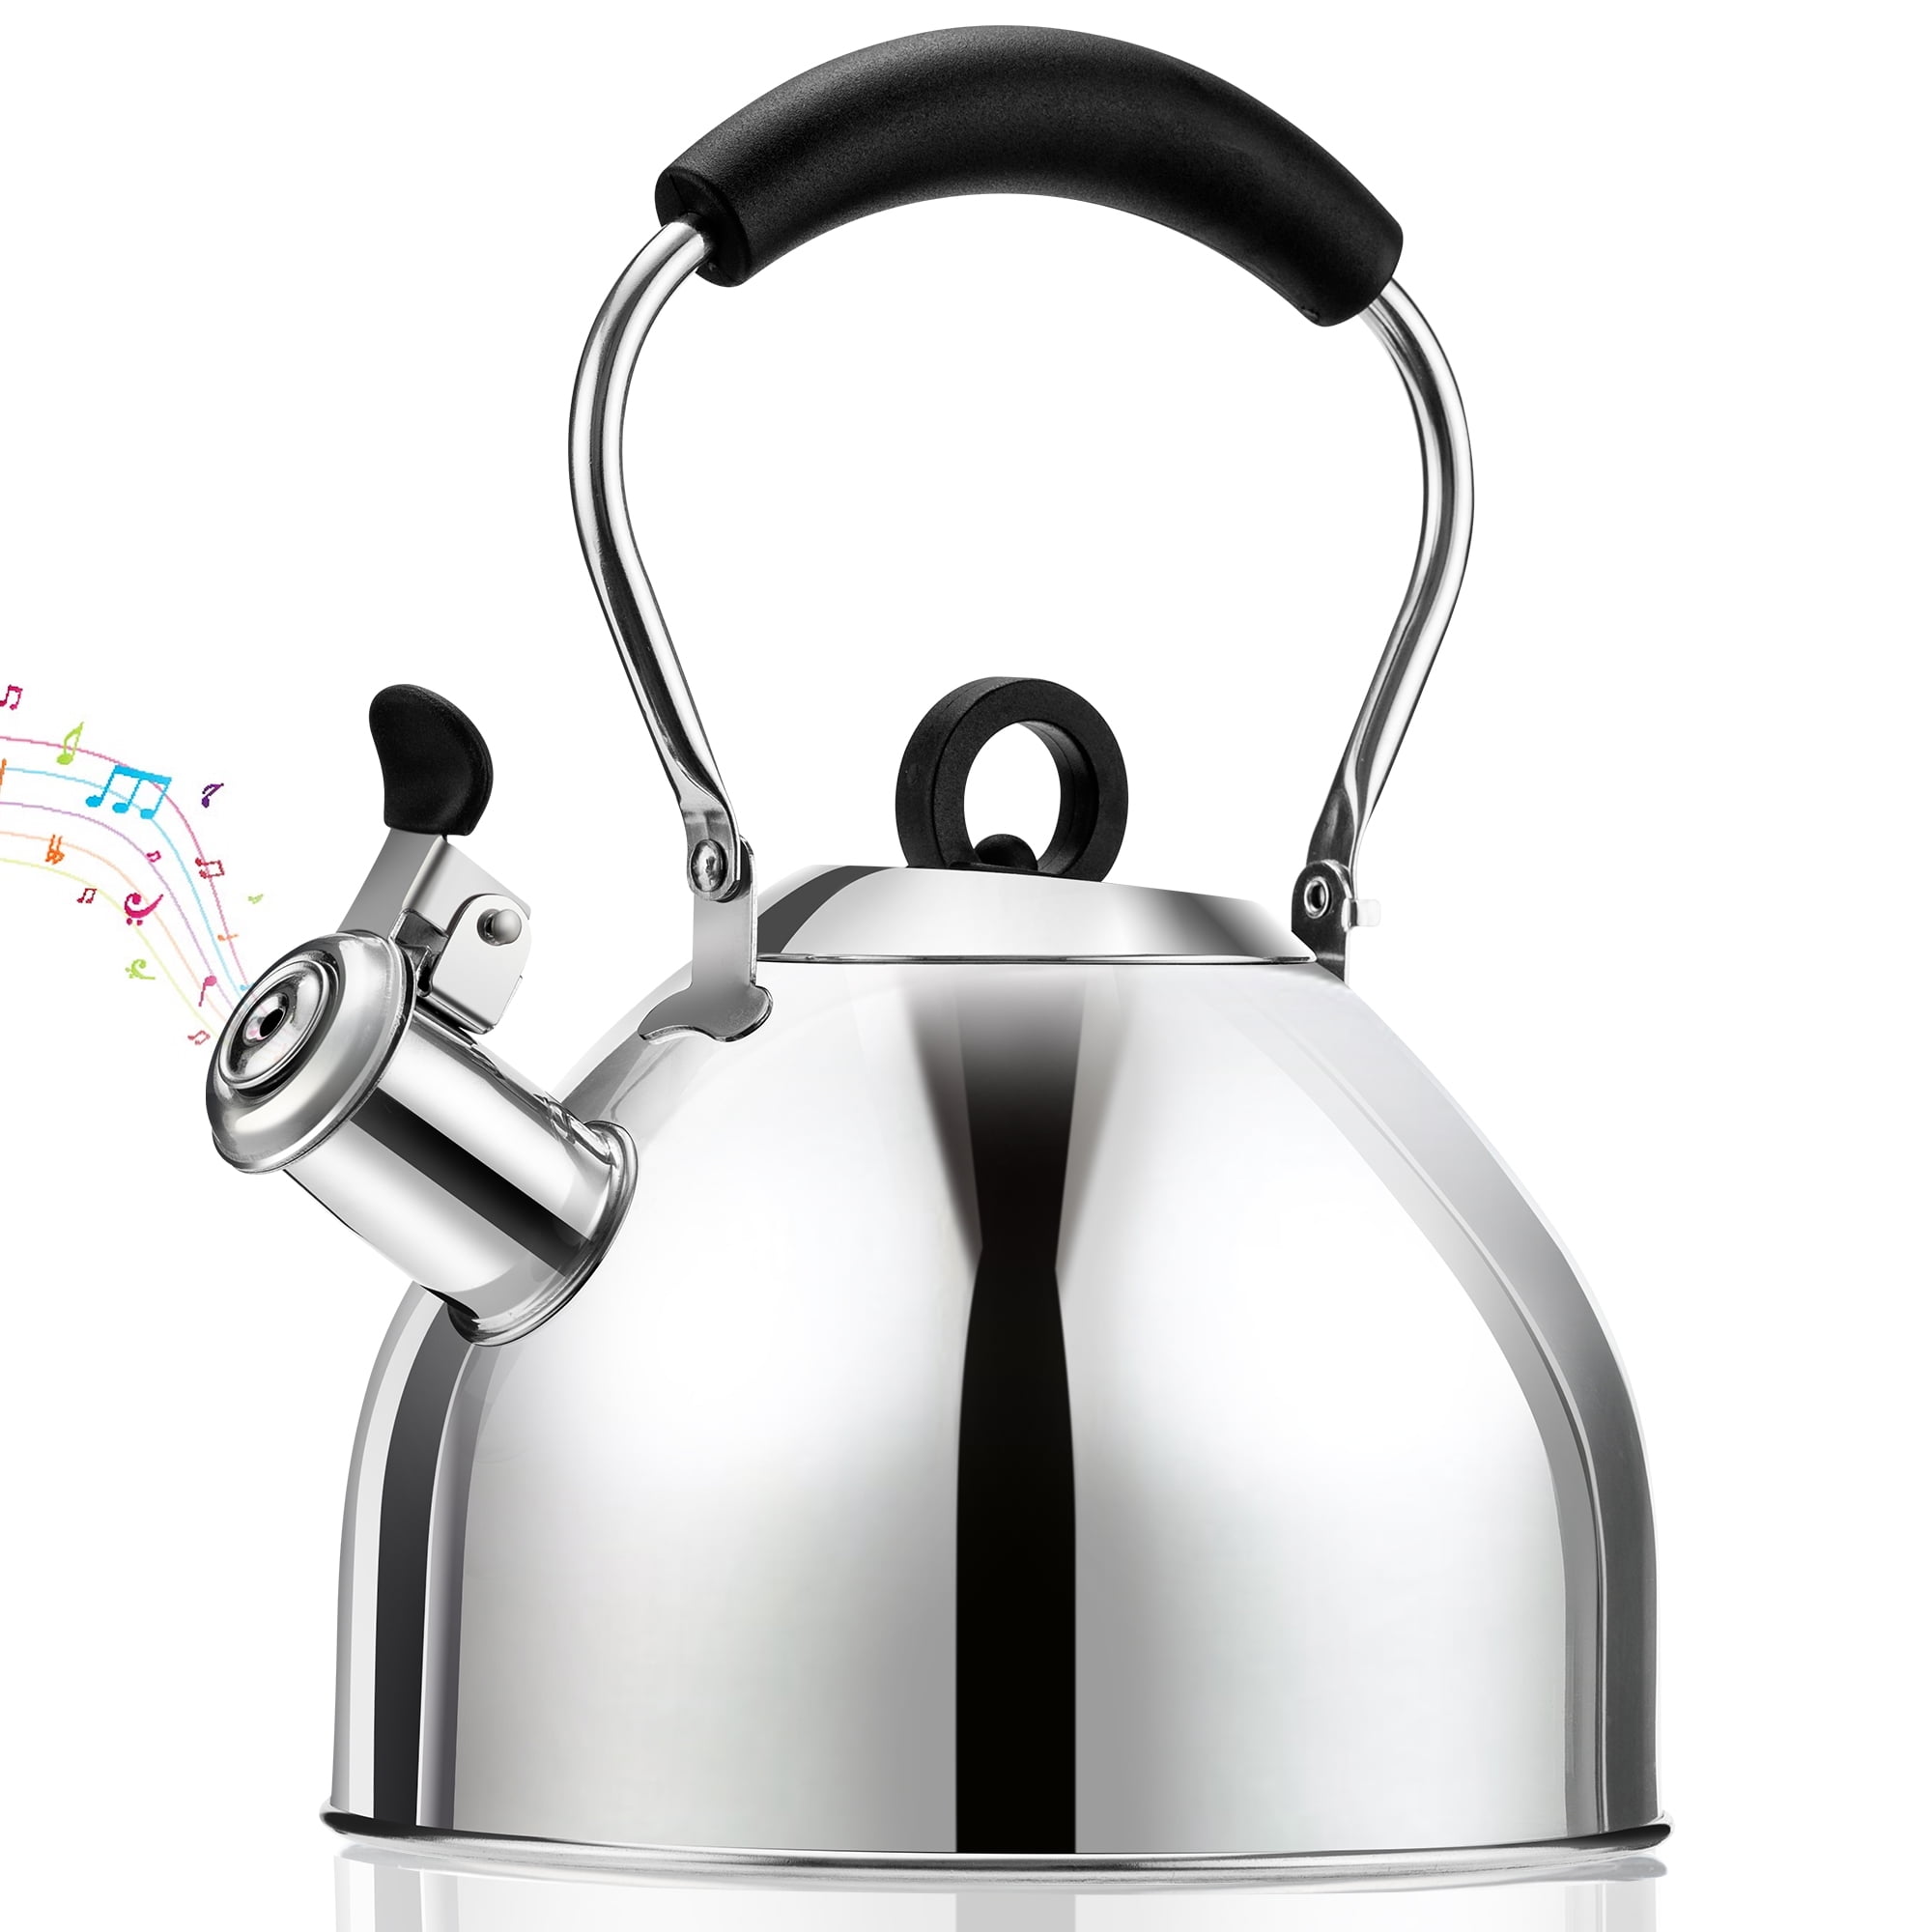 Tea Kettle Stovetop Whistling Teakettle Classic Teapot Stainless Steel Tea  Pots for Stove Top with Thin Fast Heating Base, Mirror Finish, 2 liters